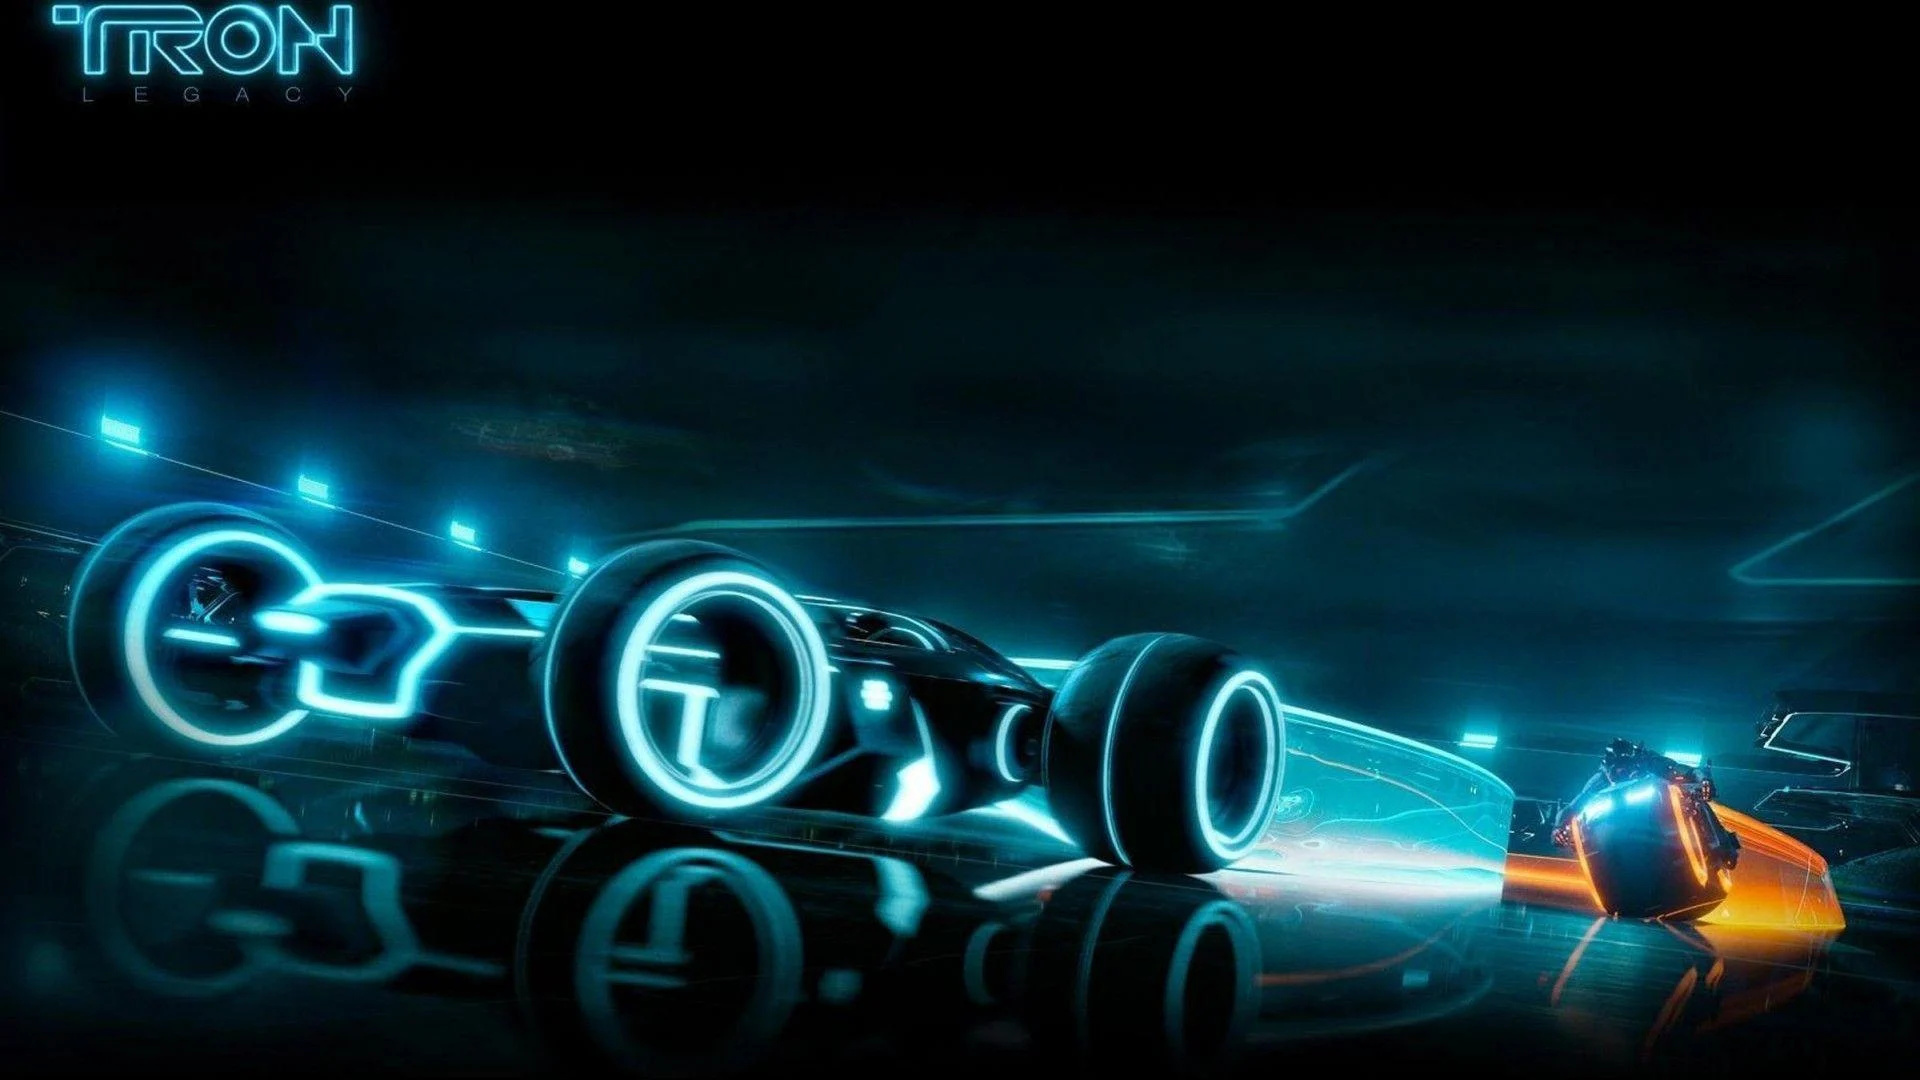 Tron (Movie): Legacy, The 2010 sequel to Disney's 1982 cult classic film. 1920x1080 Full HD Wallpaper.